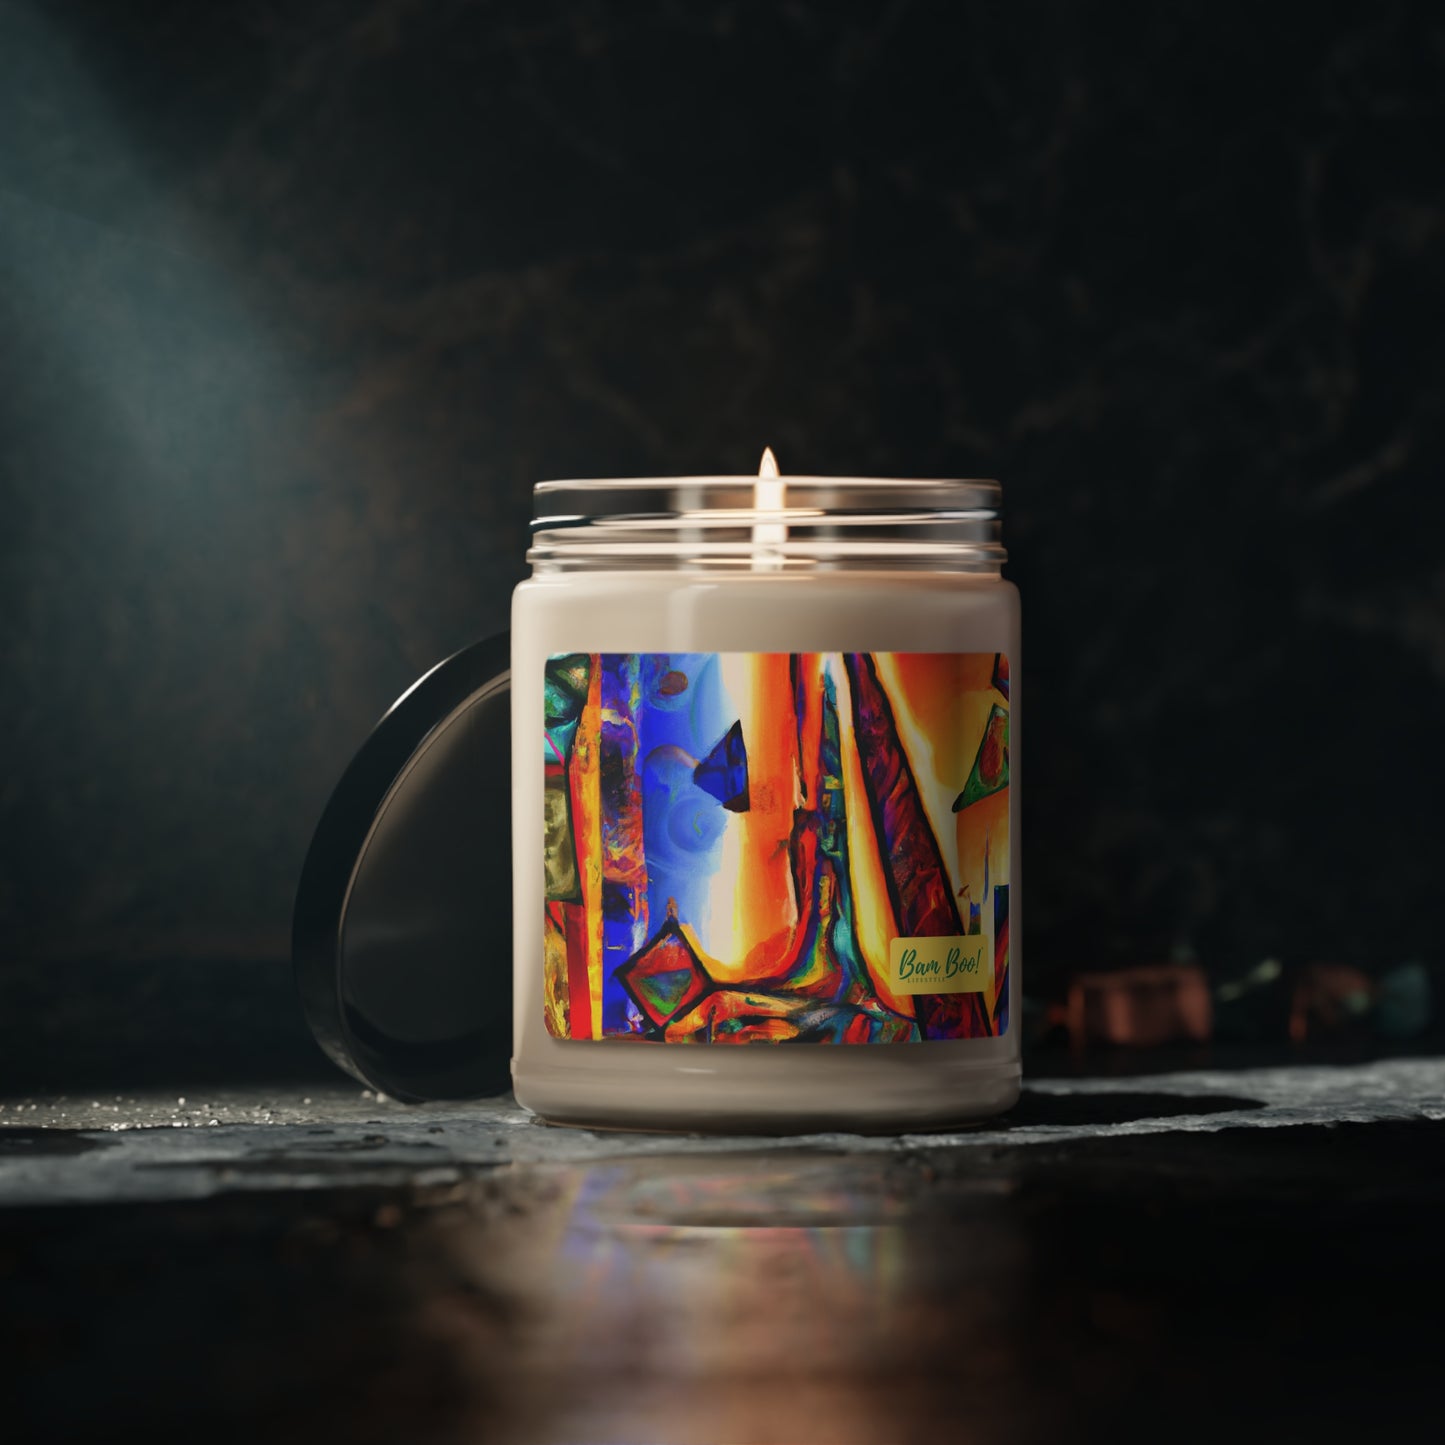 "Explorations in Artistic Hybridization" - Bam Boo! Lifestyle Eco-friendly Soy Candle